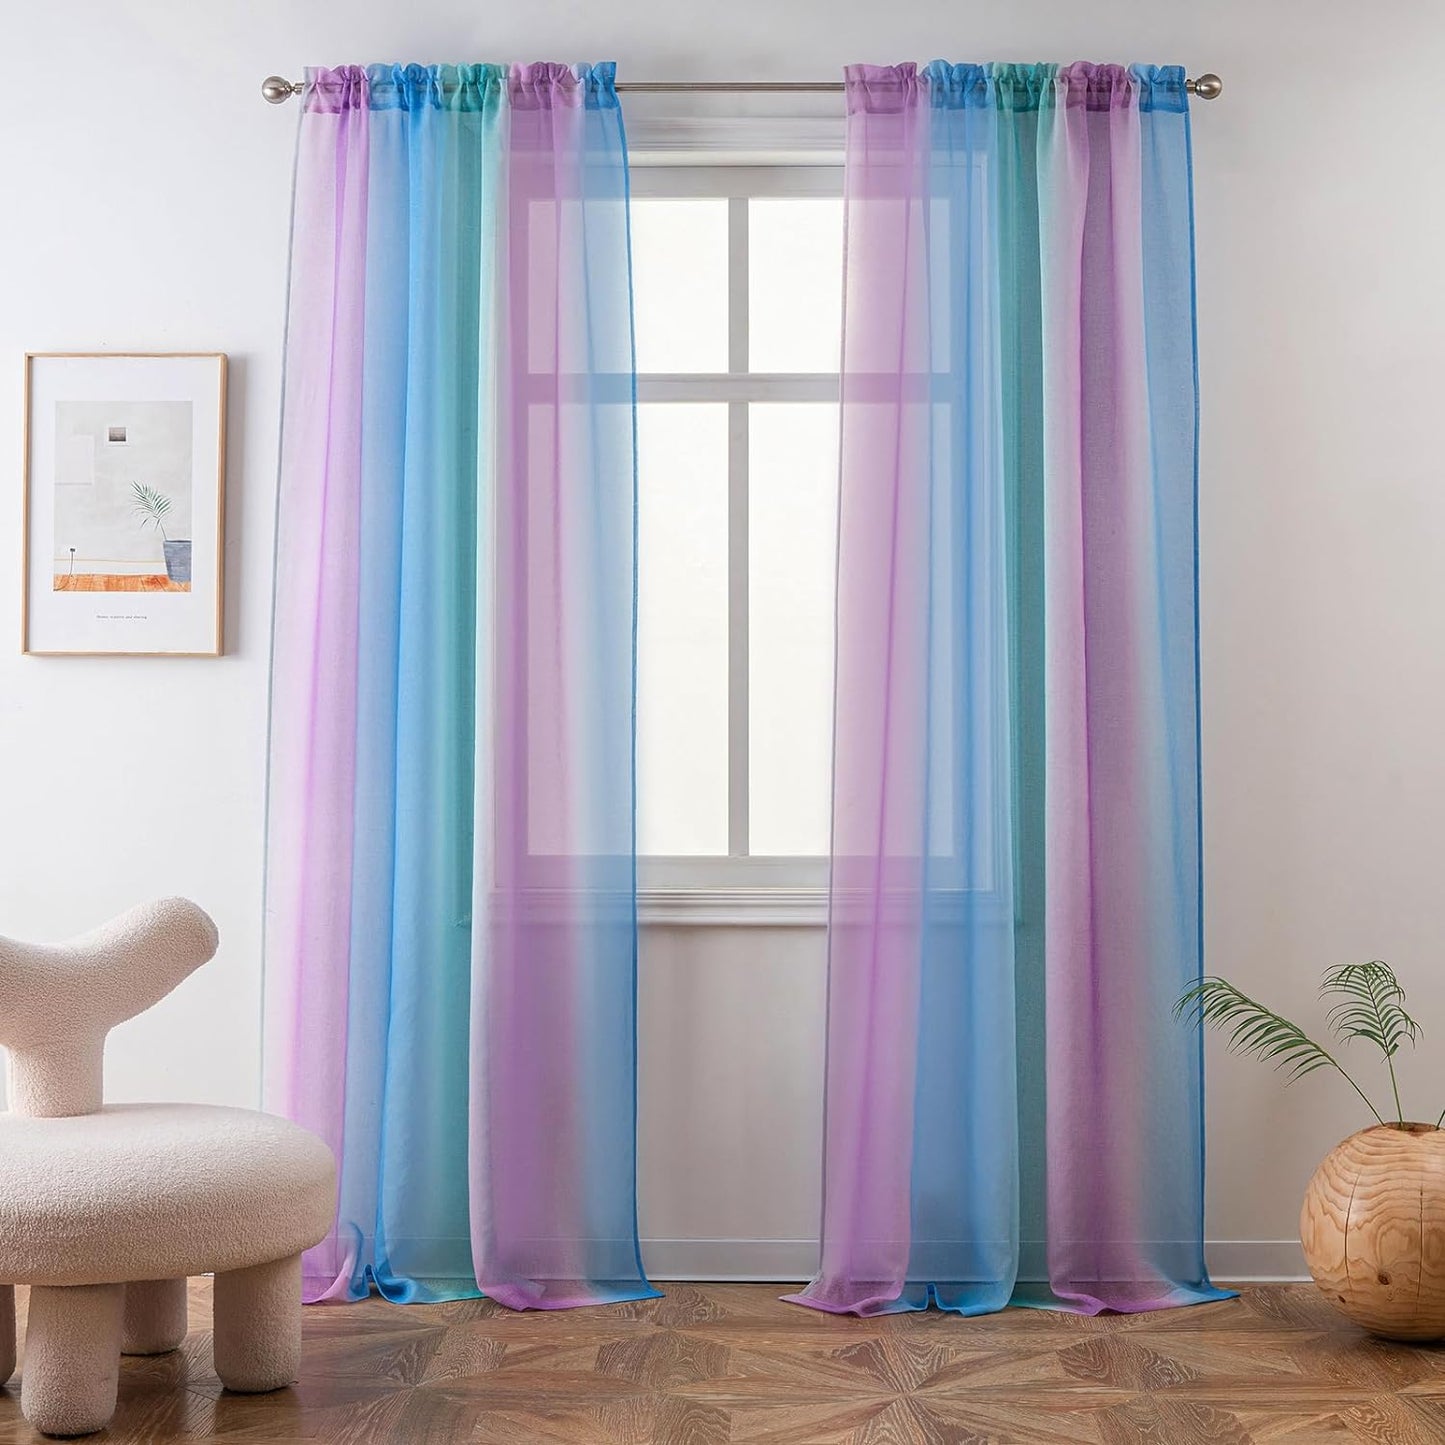 Yancorp 2 Panel Sets Semi Bedroom Curtains 63 Inch Length Sheer Rod Pocket Curtain Linen Teal Turquoise Purple Ombre Girls Living Room Mermaid Bedroom Nursery Kids Decor (Turquoise Purple, 40"X63")  Yancorp Purple Teal Blue 52"X84" 